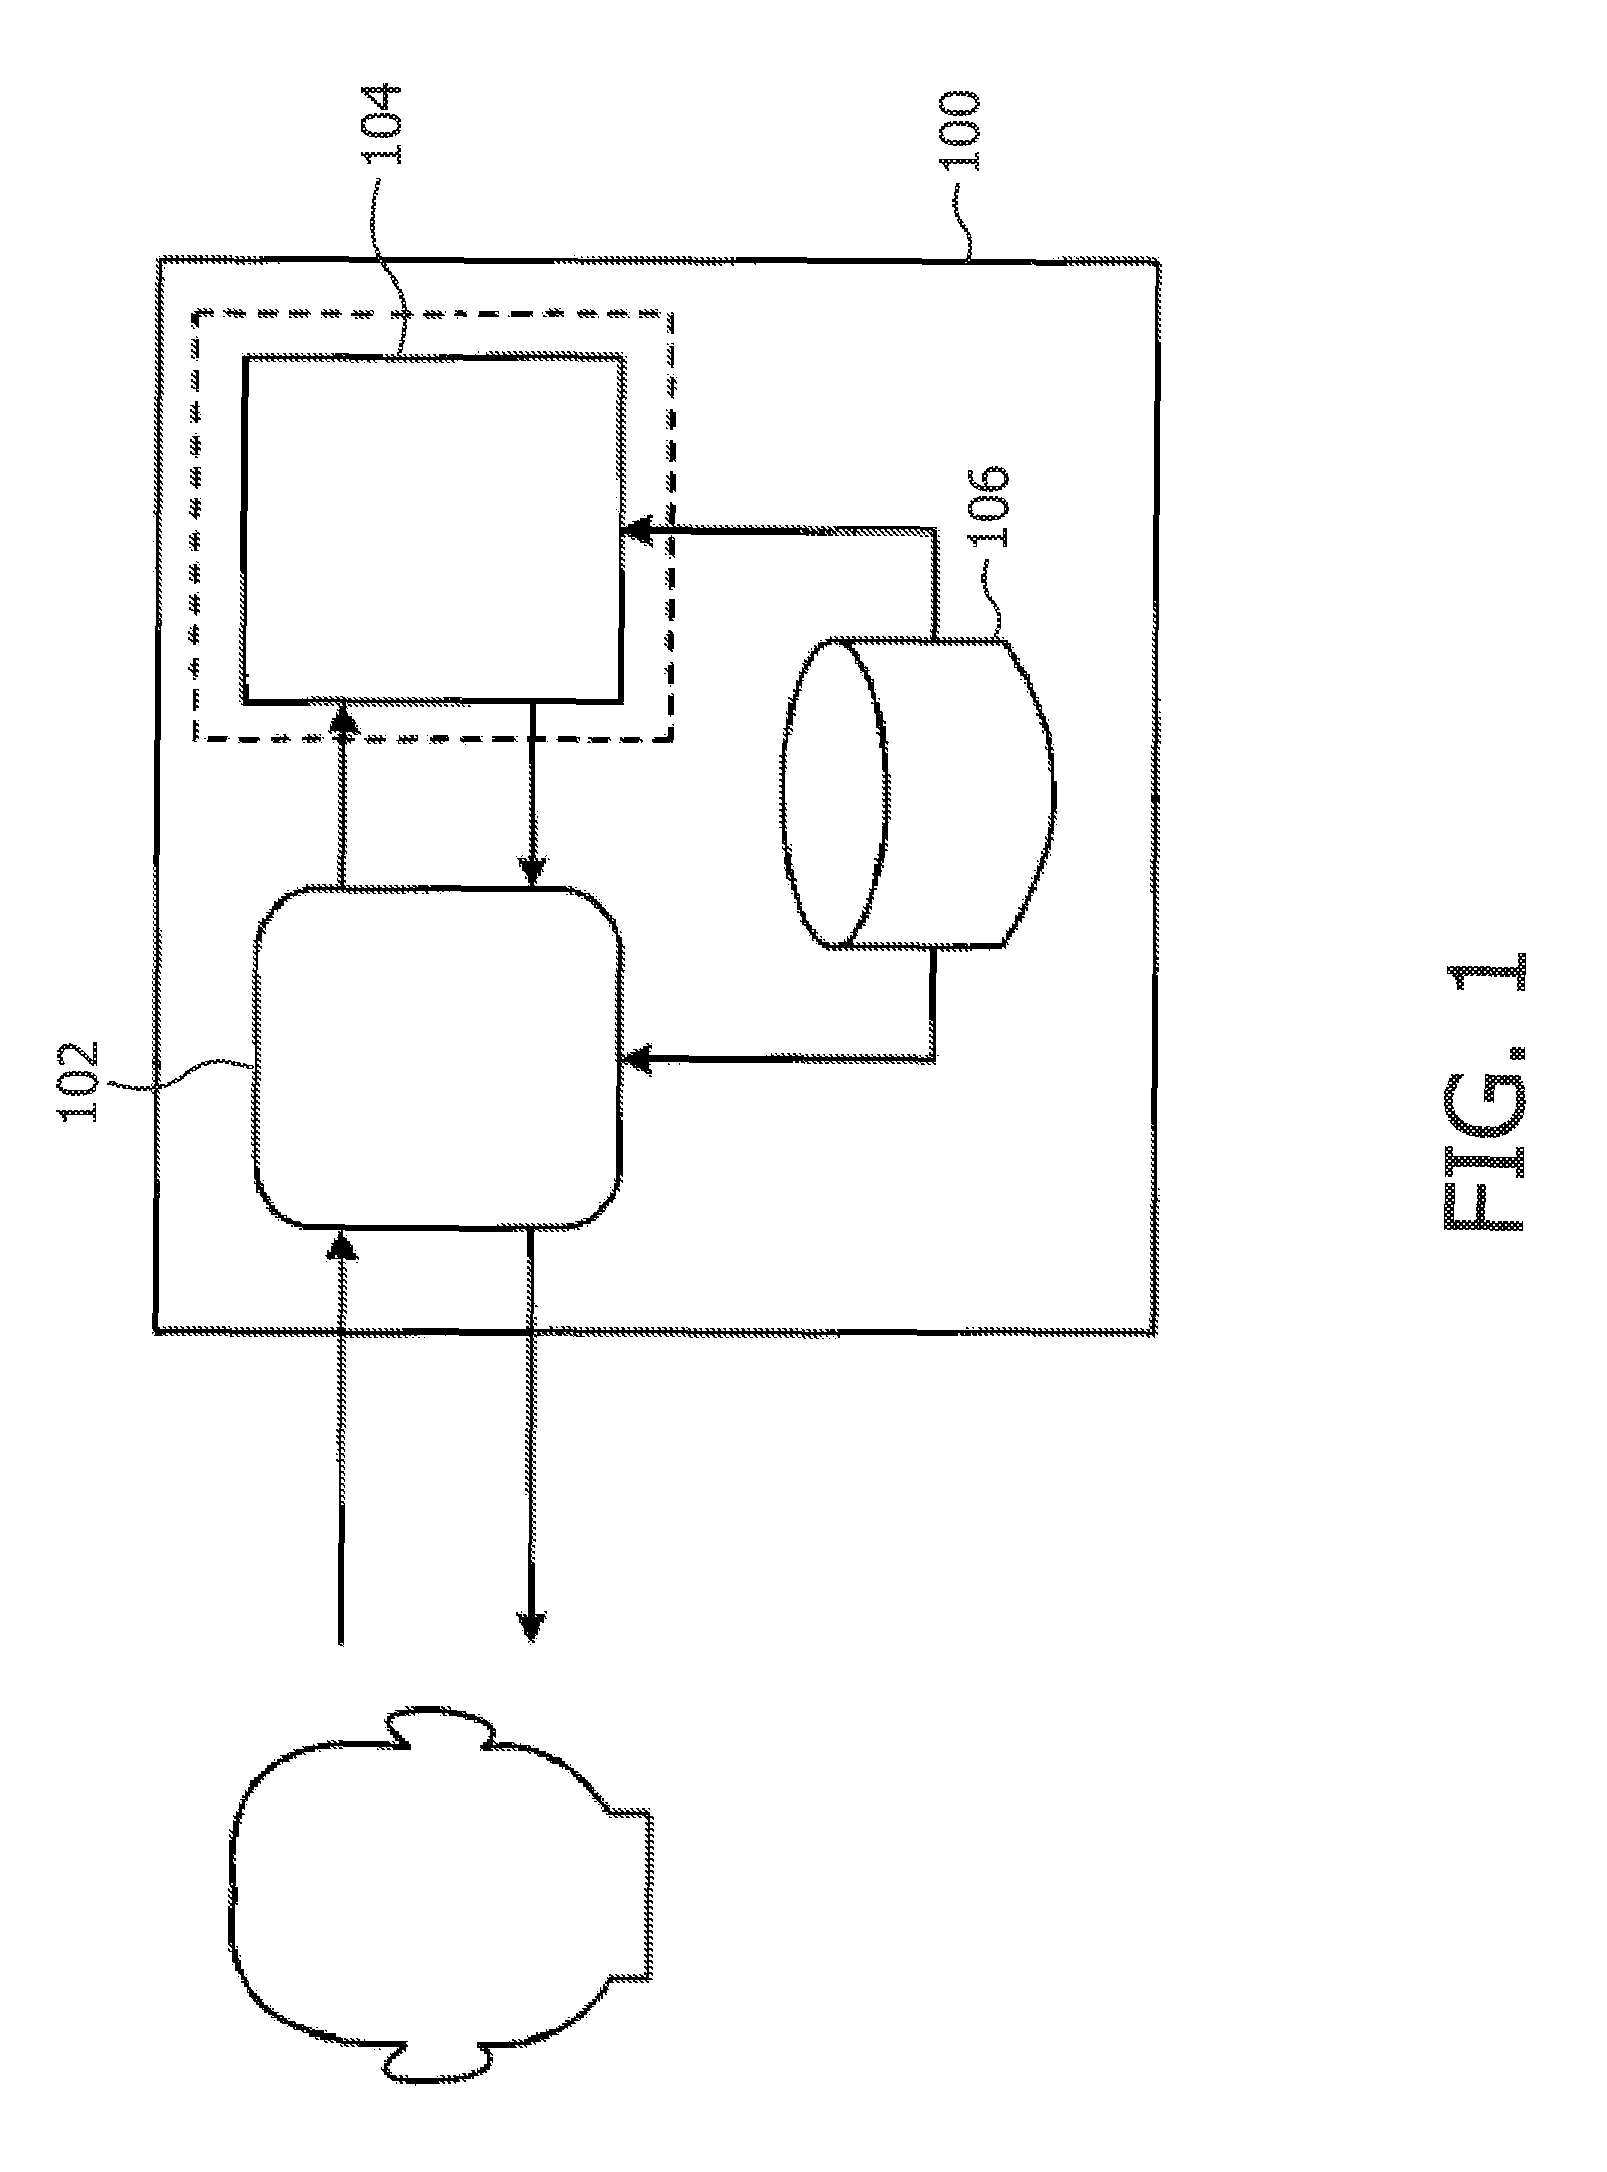 Method and Apparatus for Generation of a Sequence of Elements